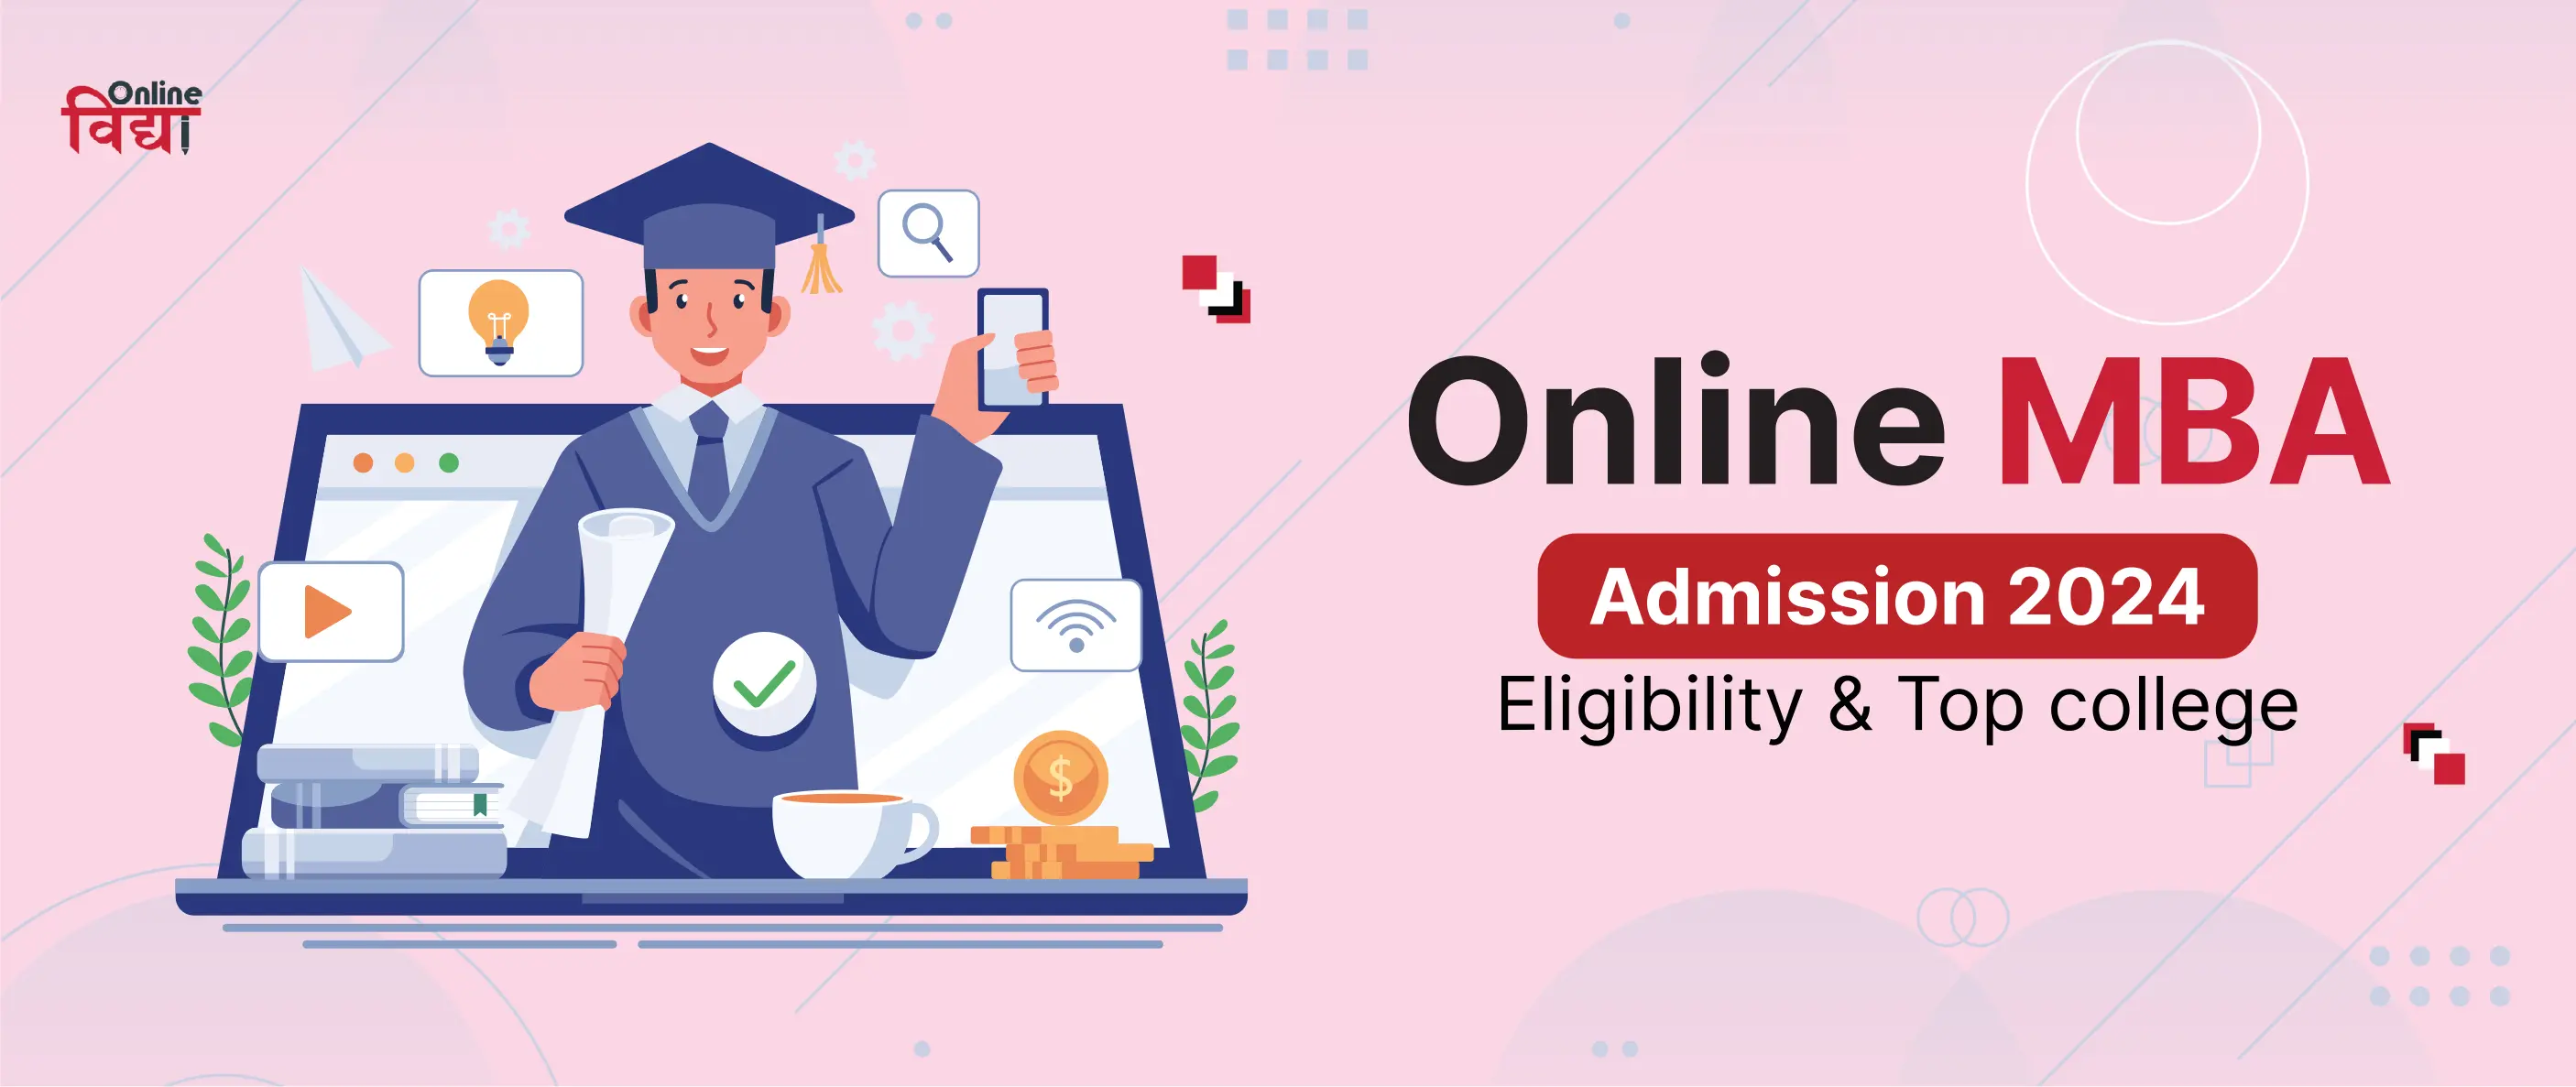 Online MBA Admission 2024 - Eligibility & Top College